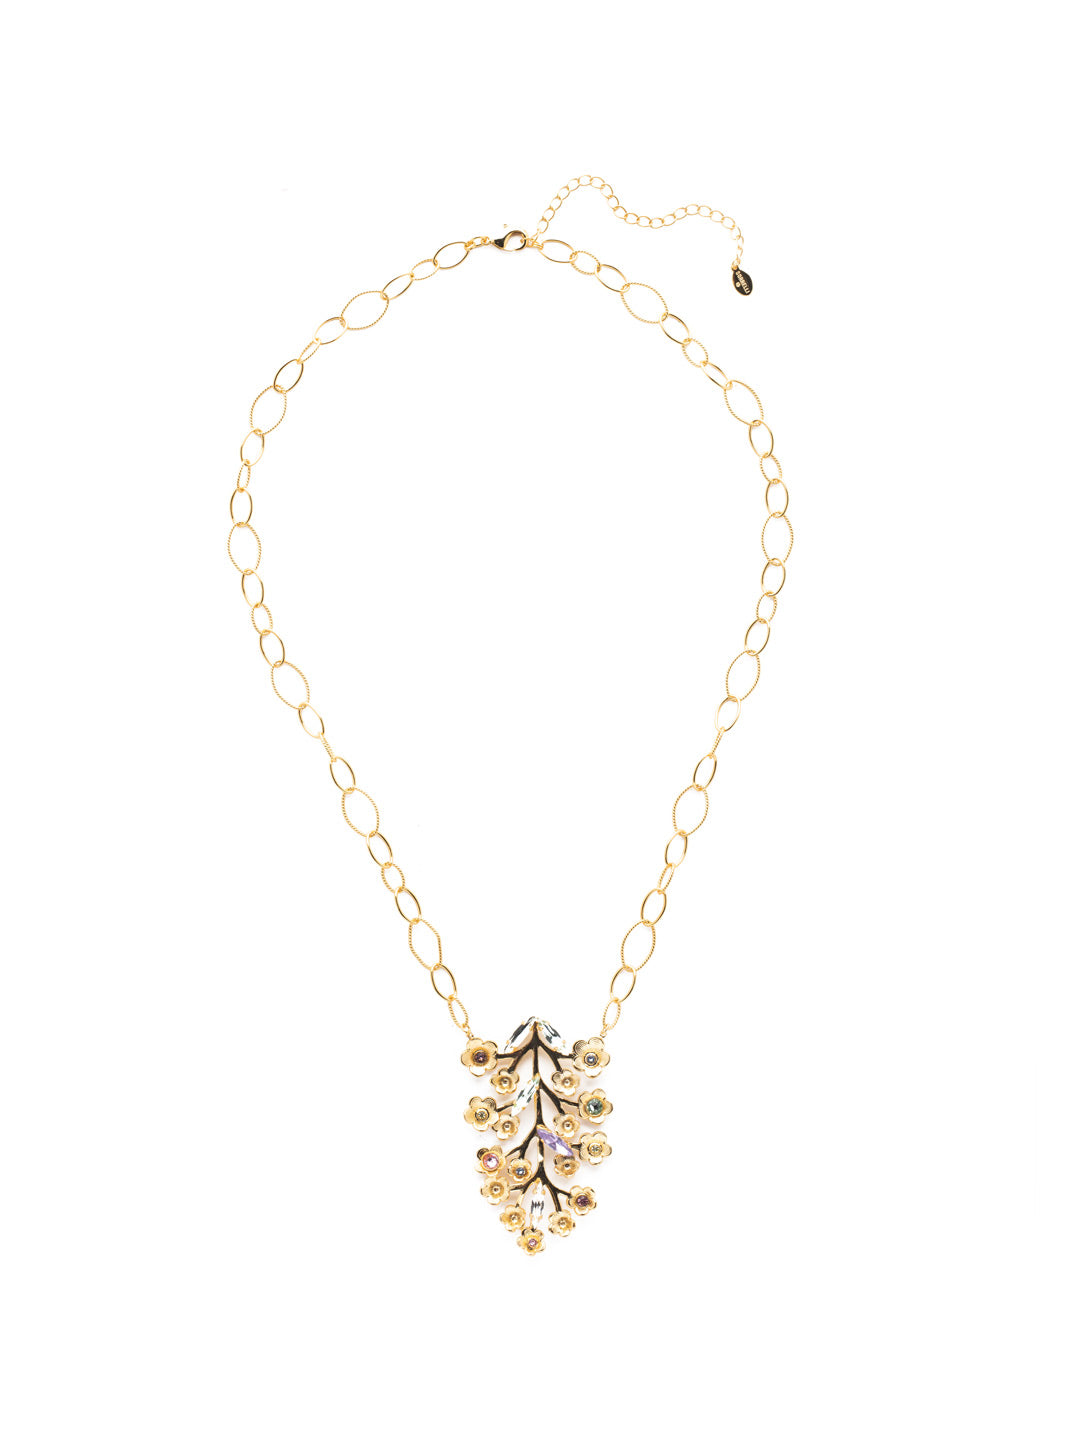 Ambrosia Pendant Necklace - NEV5BGSPR - <p>The Ambrosia Long Pendant Necklace is a beauty. Airy links of metal hold a center Ambrosia leaf accented with sparkling crystals. From Sorrelli's Spring Rain collection in our Bright Gold-tone finish.</p>